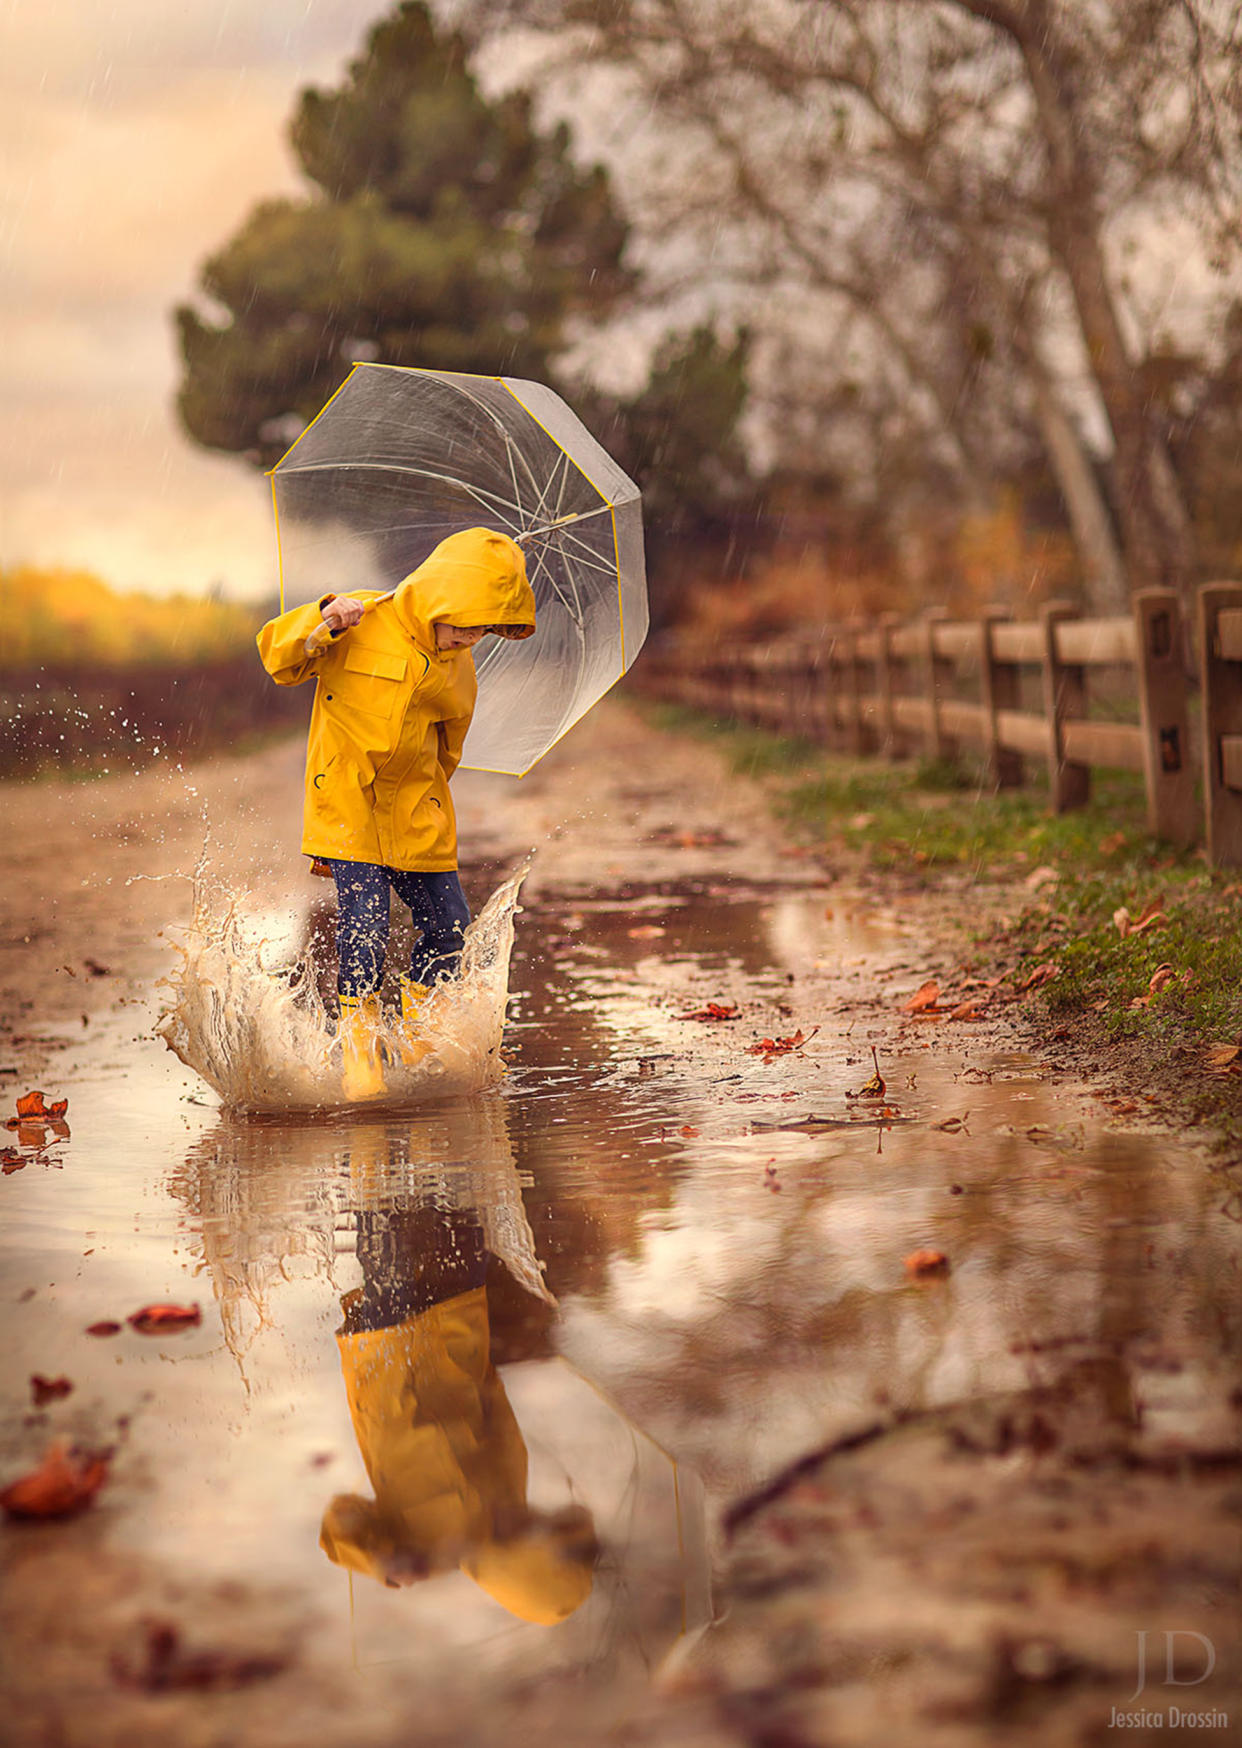 Drossin suggests putting kids in situations where they will forget the camera and have fun. (Jessica Drossin)